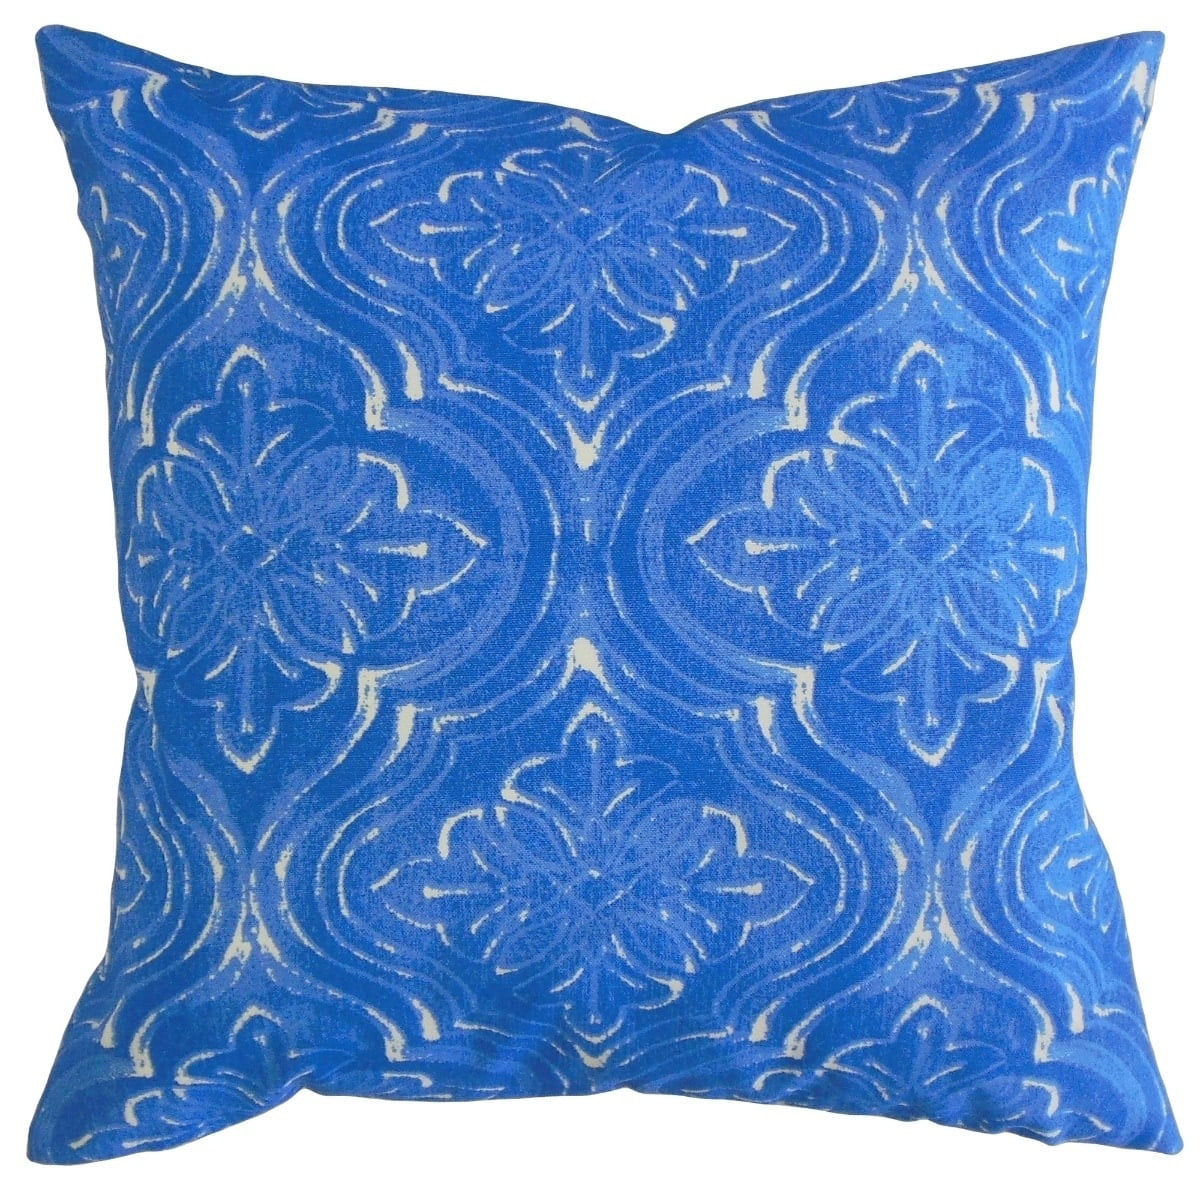 Blue The Pillow Collection Throw Pillow 24 x 24 